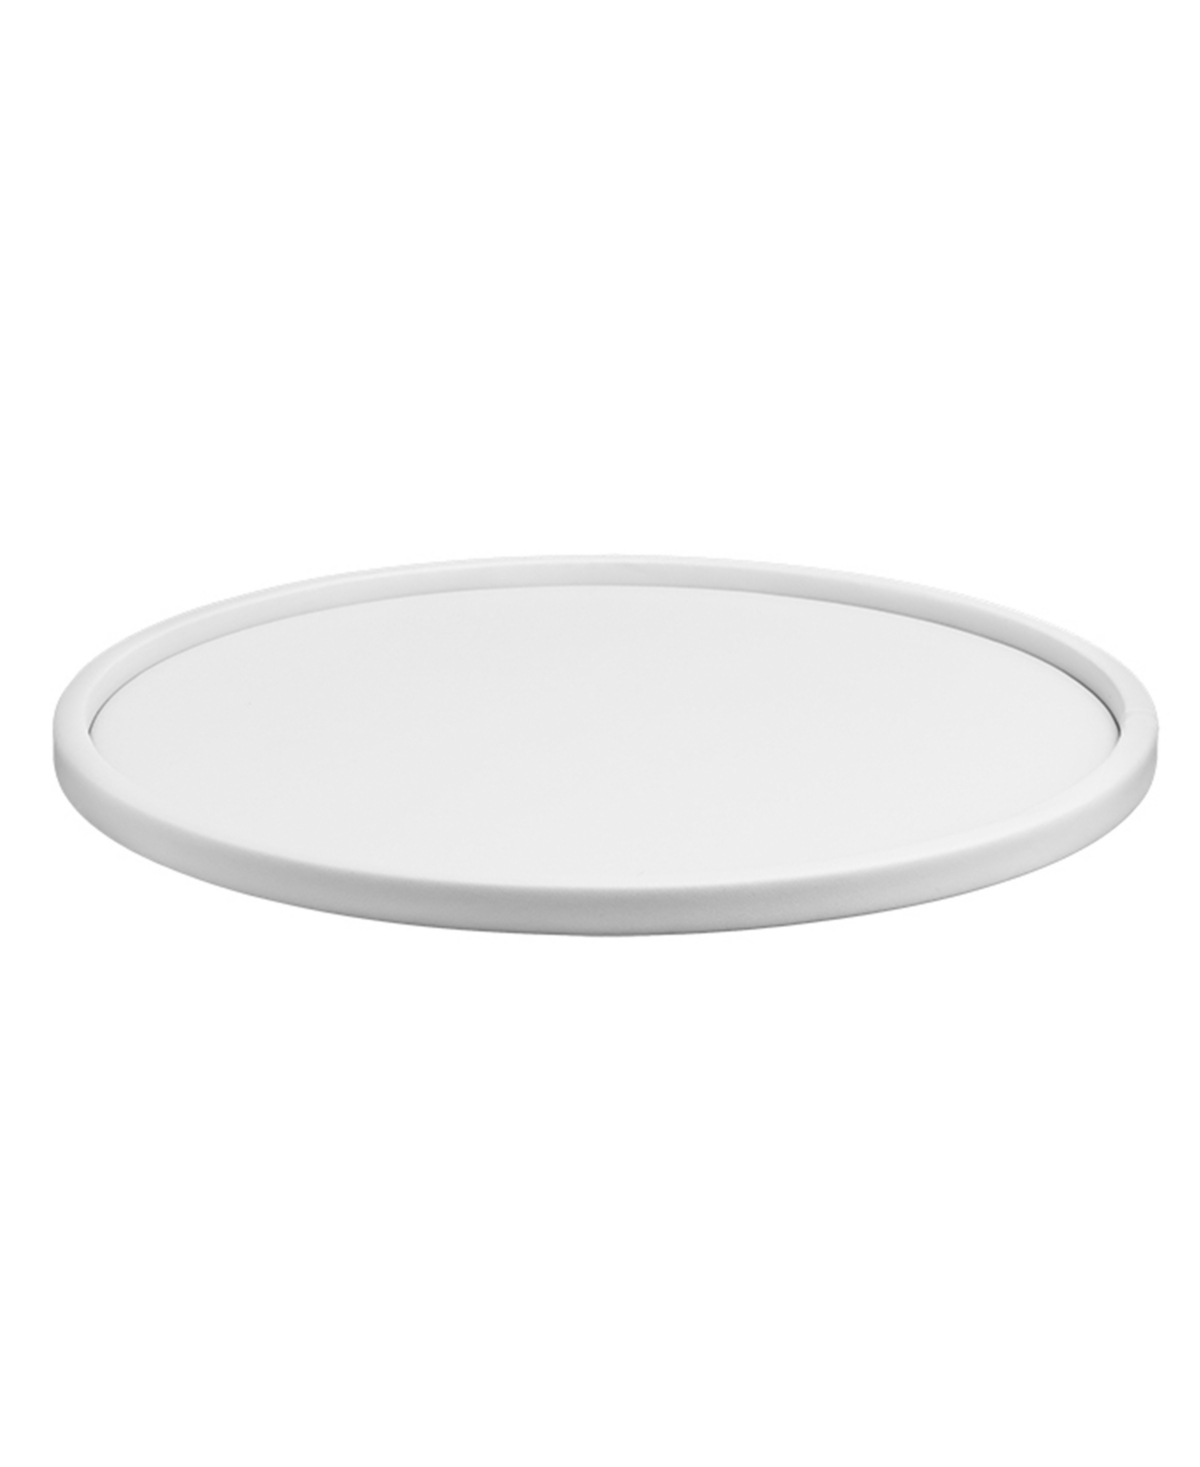 14269764 Contempo 14 Round Sidewall Serving Tray sku 14269764